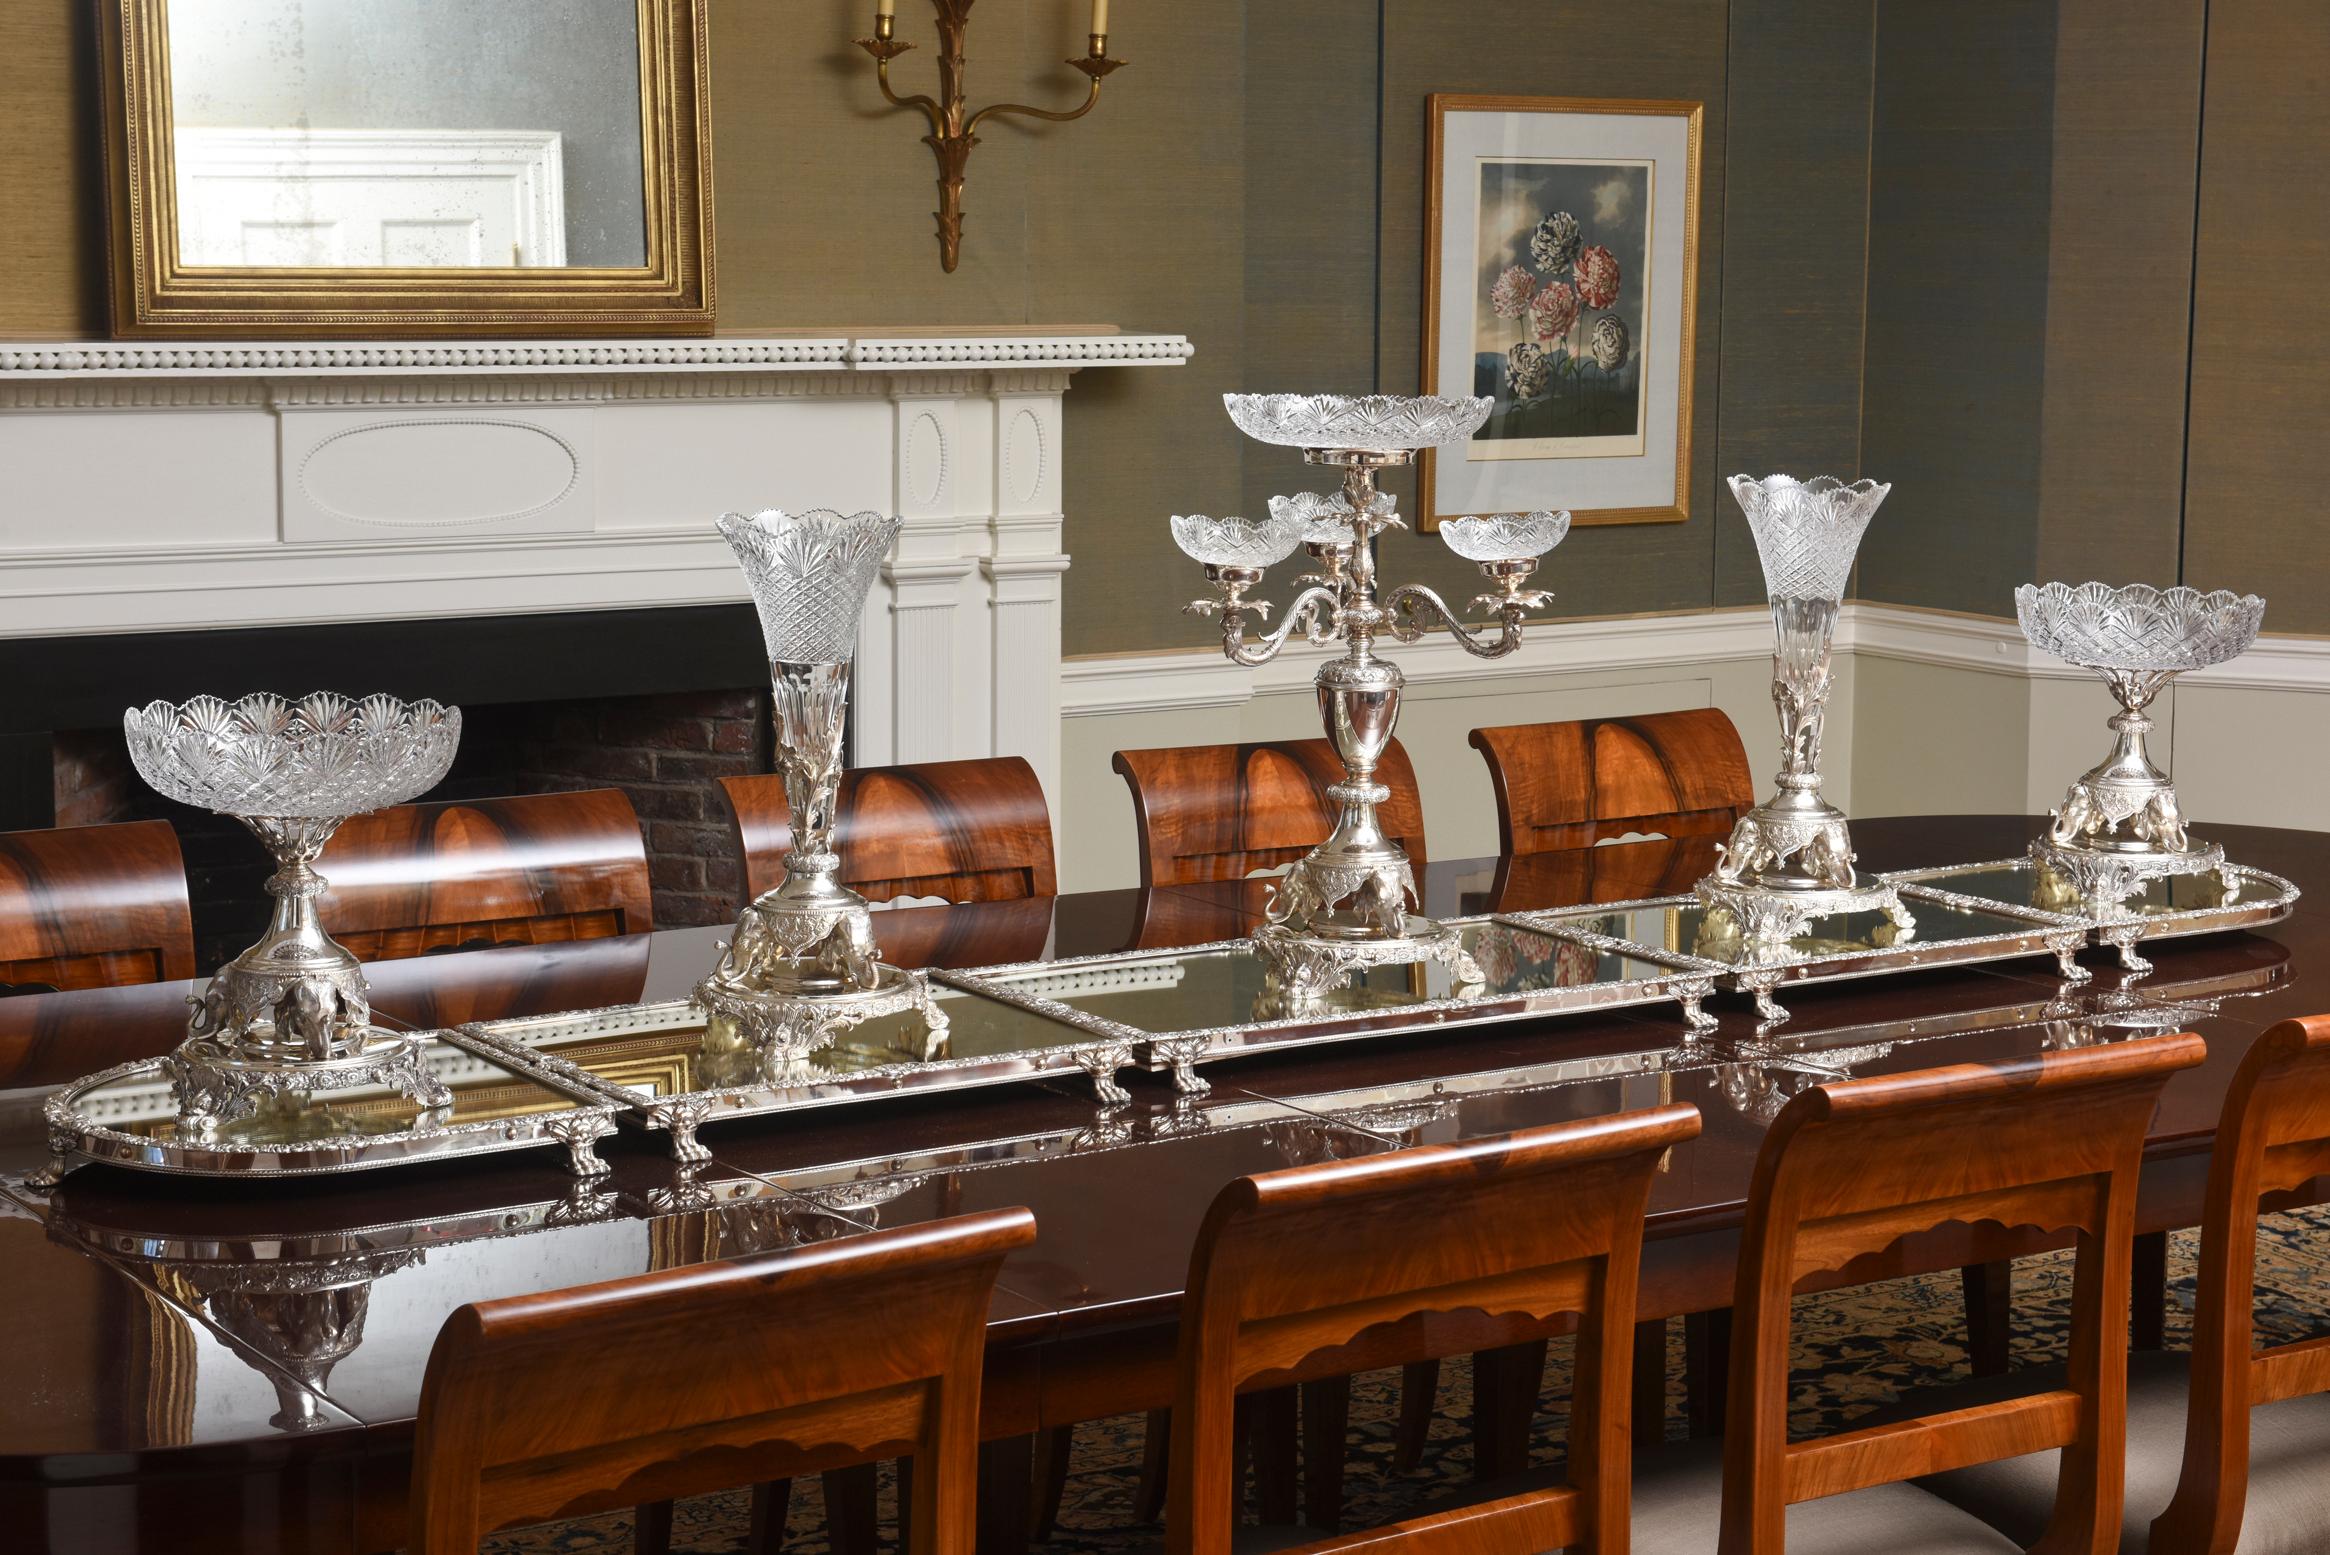 Measuring 8 feet in length, this banquet sized elaborate silver plate and cut crystal centerpiece ensemble is show stopping stunning. It features a 5-piece mirrored plateau having shell and scrolled rim with hall marks for John Turton & Co. A